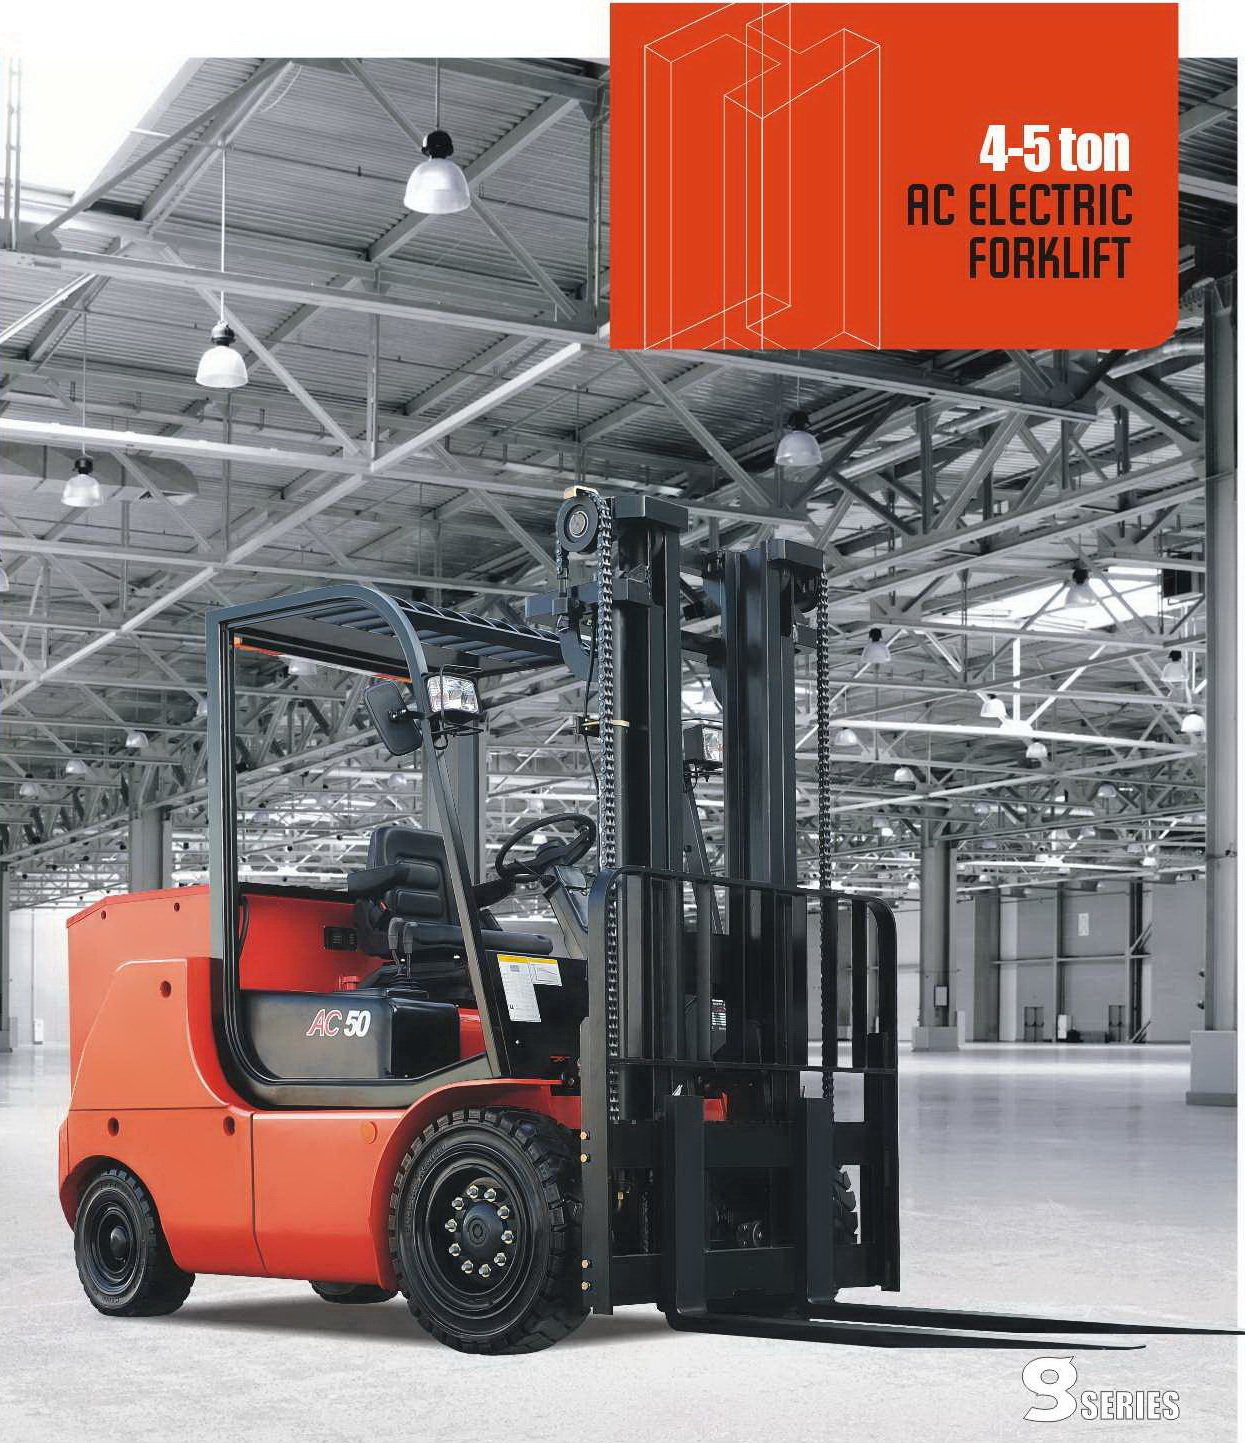 4-5 ton AC ELECTRIC FORKLIFT